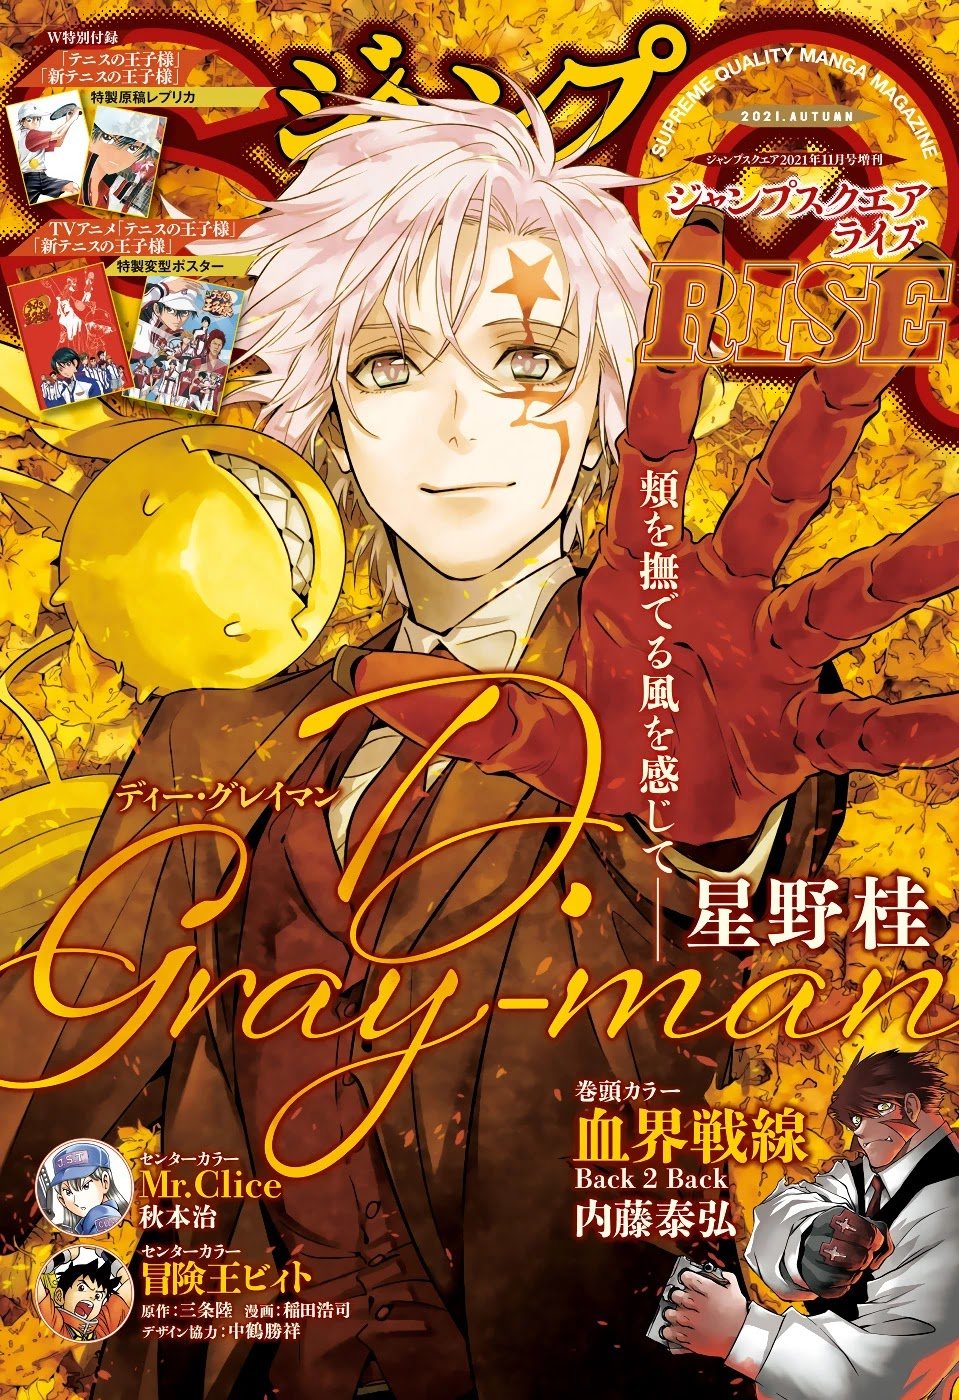 D.Gray-man chapter 242 page 2